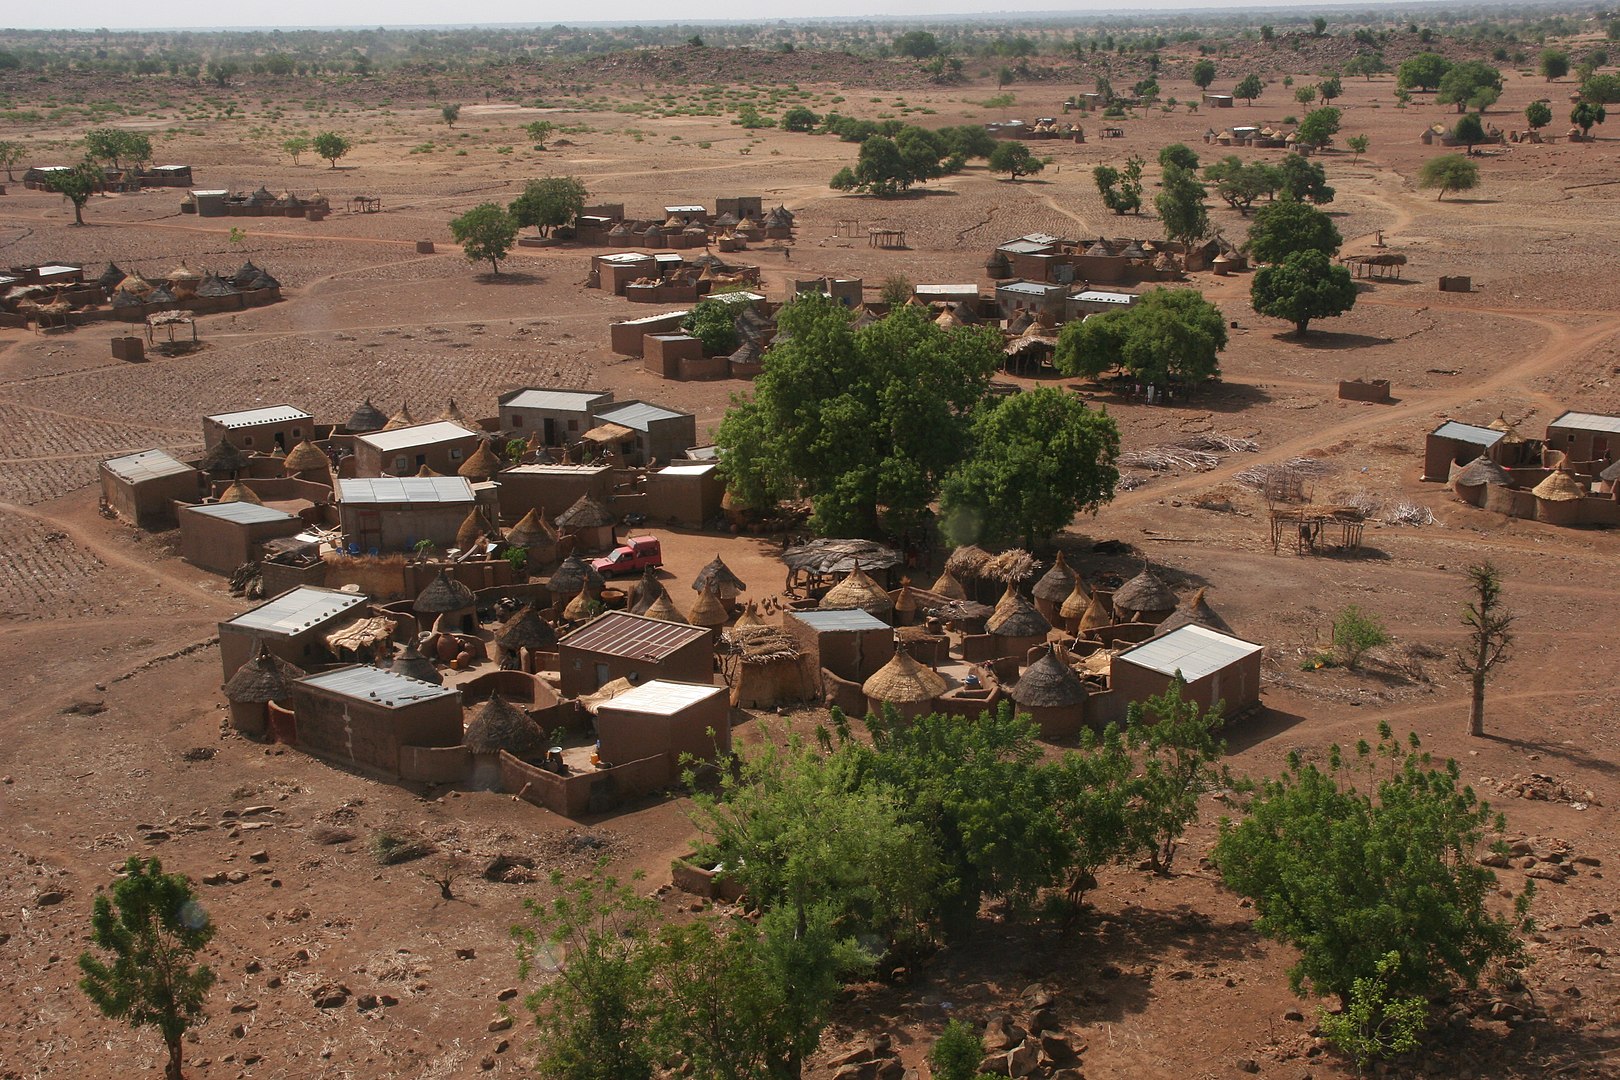 <p>General view of Gando Village showing clusters of vernacular, earthen housing with either conical and flat roofs</p>